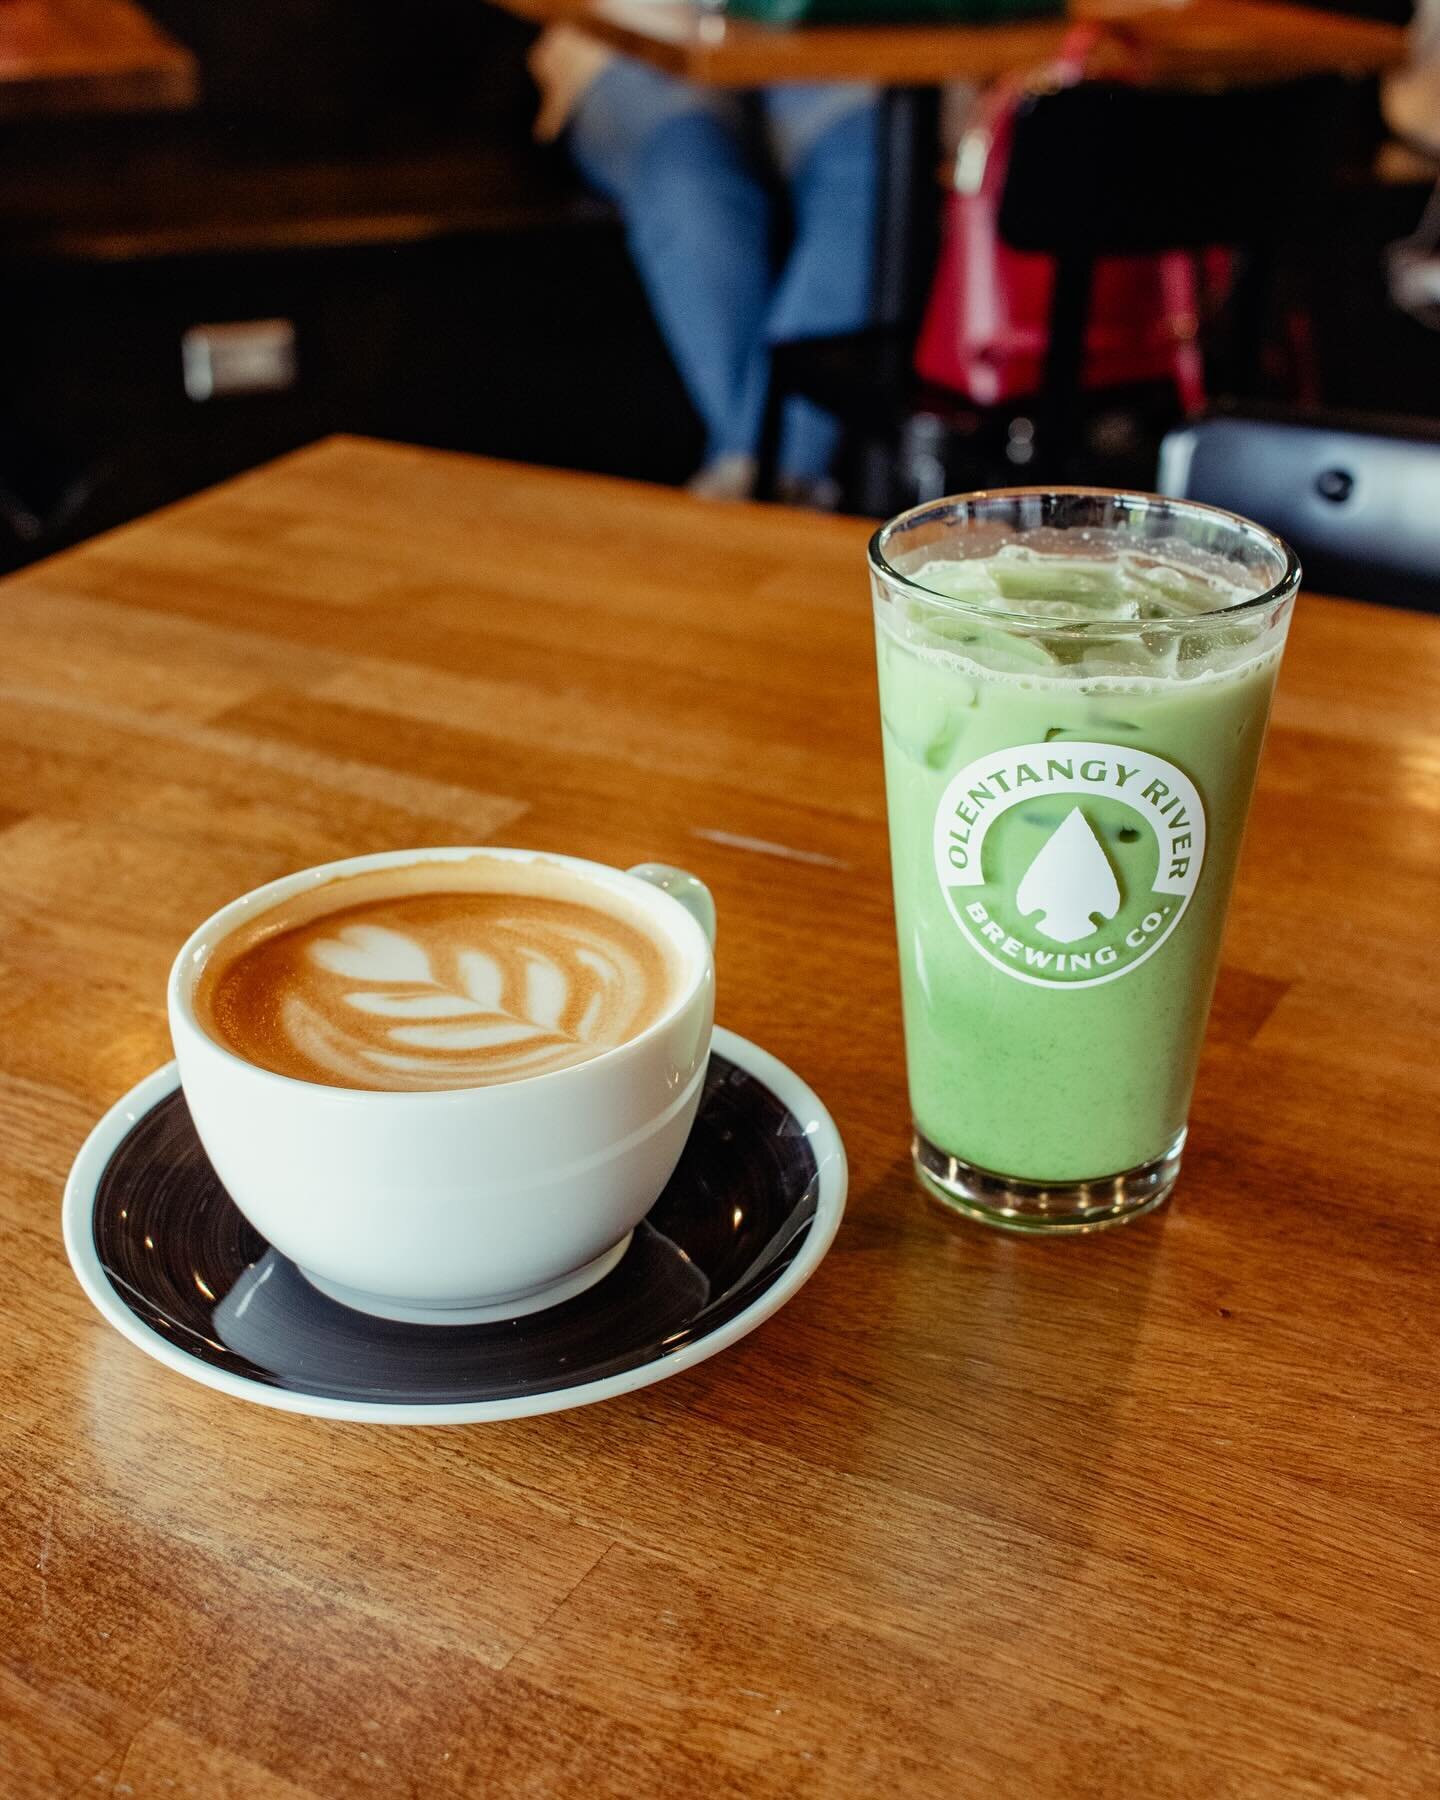 Spring seasonal drinks are in!
Salted Honey Lavender Latte &mdash; made with house made lavender syrup, wildflower honey, and kosher salt
Blueberry Mint Matcha &mdash; Blueberry pur&eacute;e, house made mint syrup, matcha, and oat milk

Serving now, 